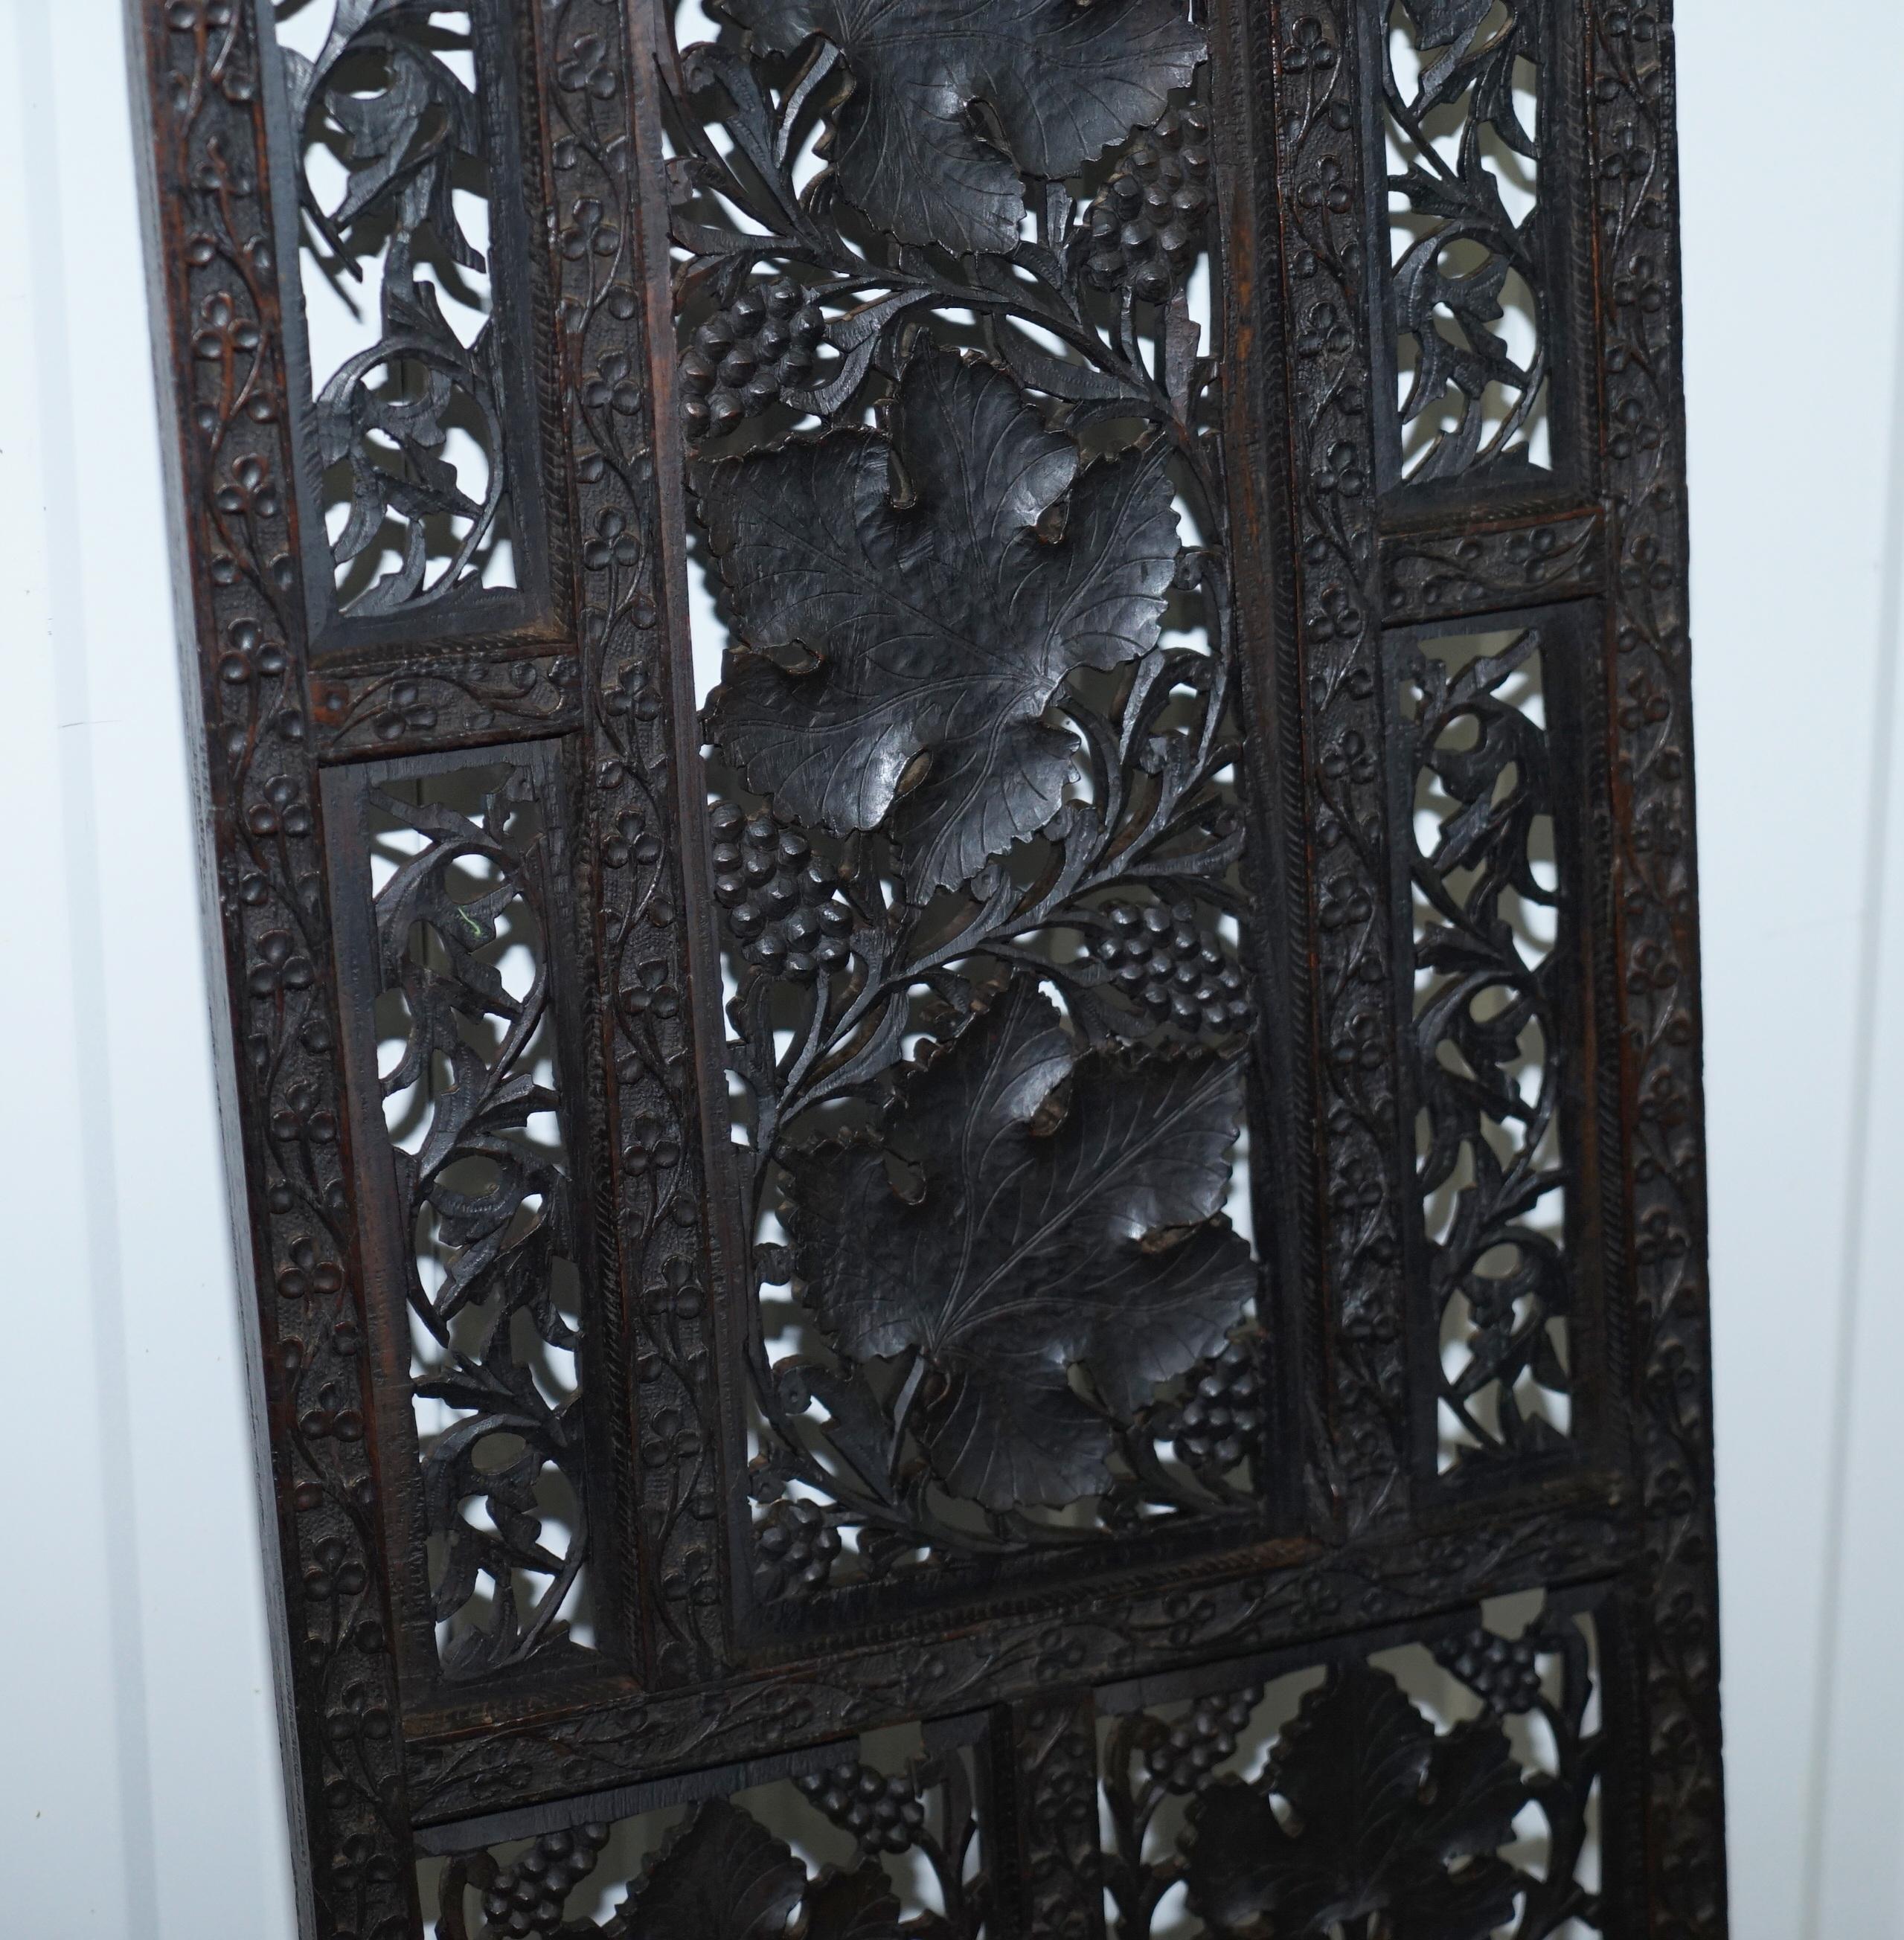 Rare Chinese Fretwork Carved Wall Panels Depicting Leaves Solid Teak Art Wood 4